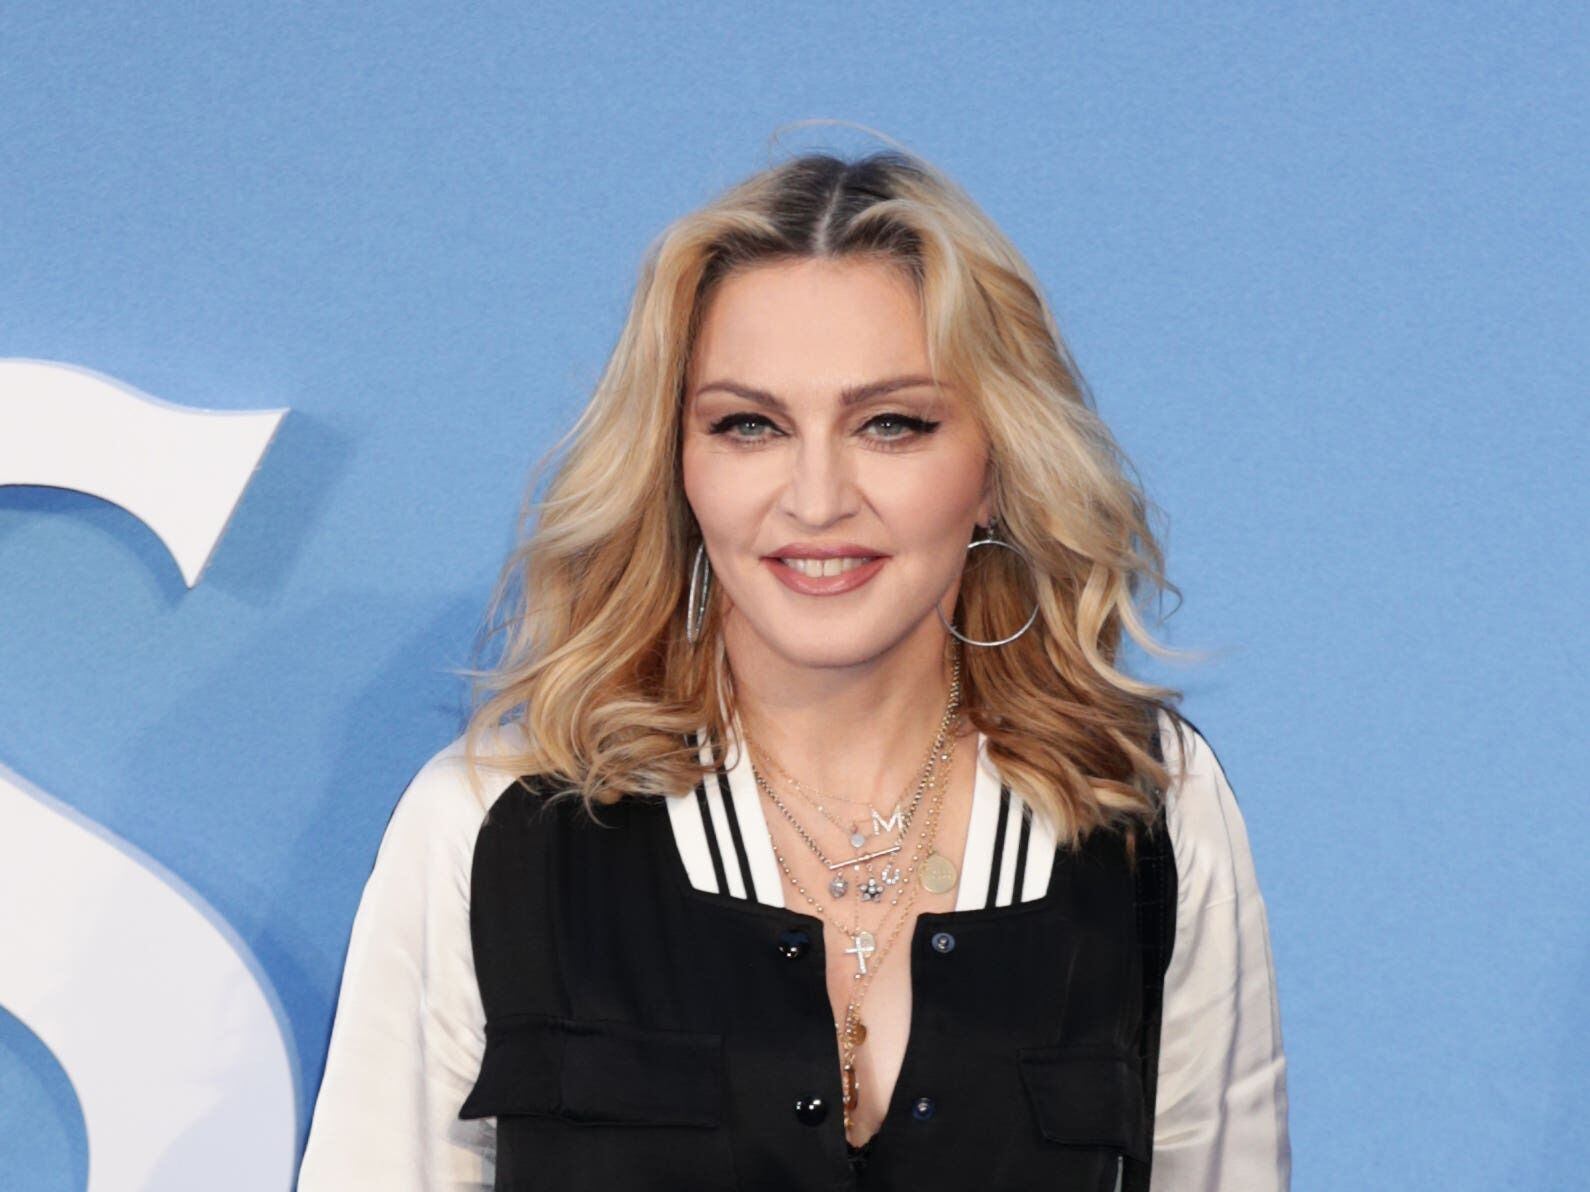 Madonna celebrates ‘miraculous recovery’ from bacterial infection one year on